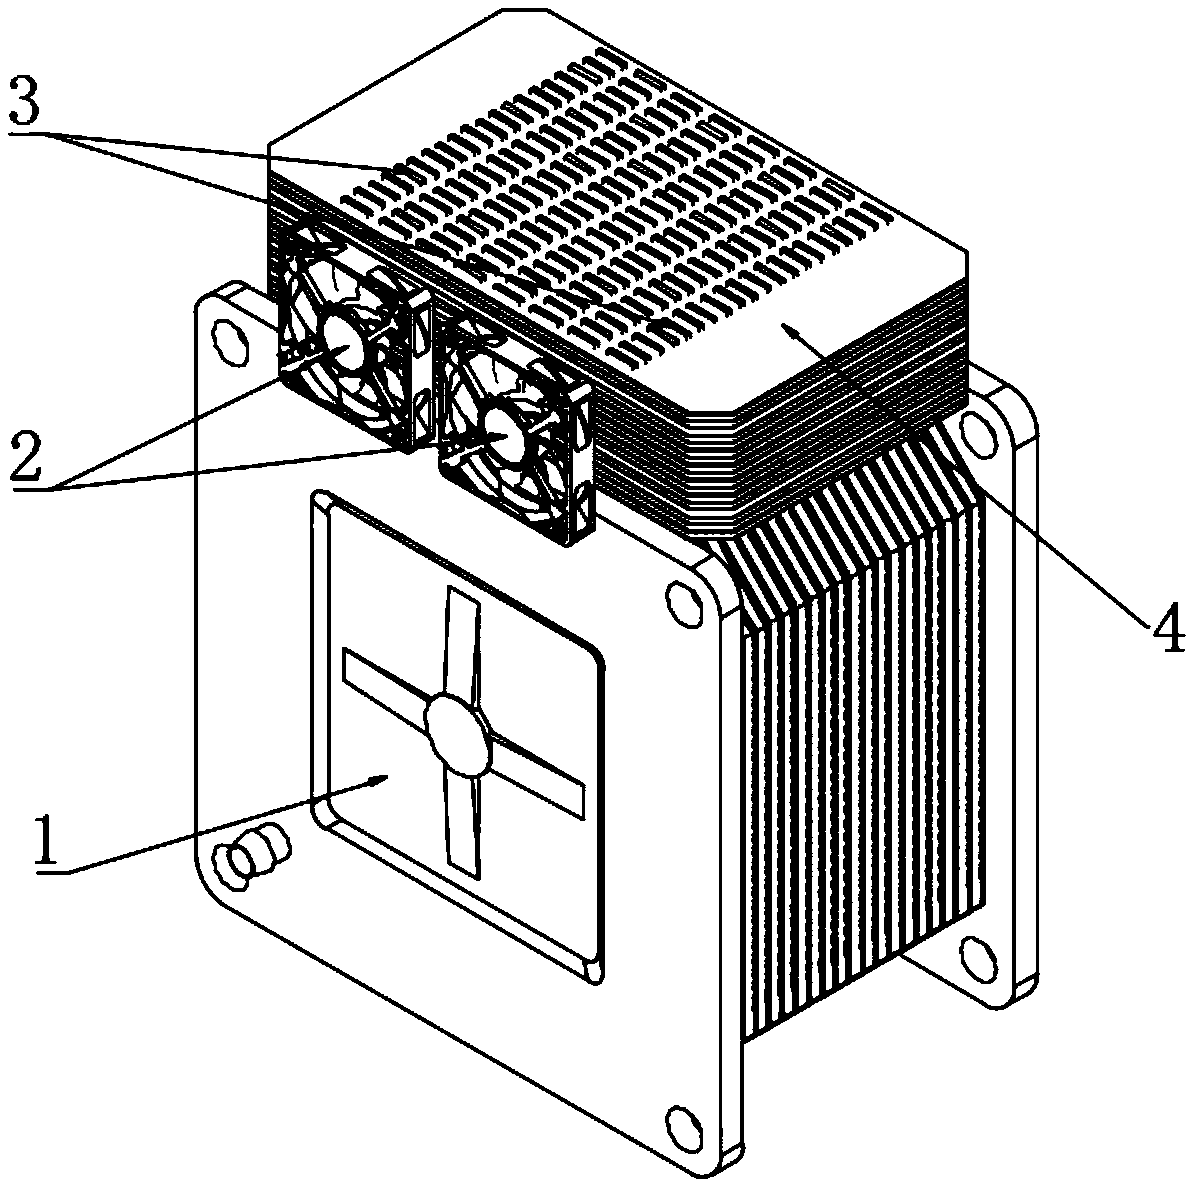 An air-cooled module for heat transfer temperature uniformization of a fuel cell